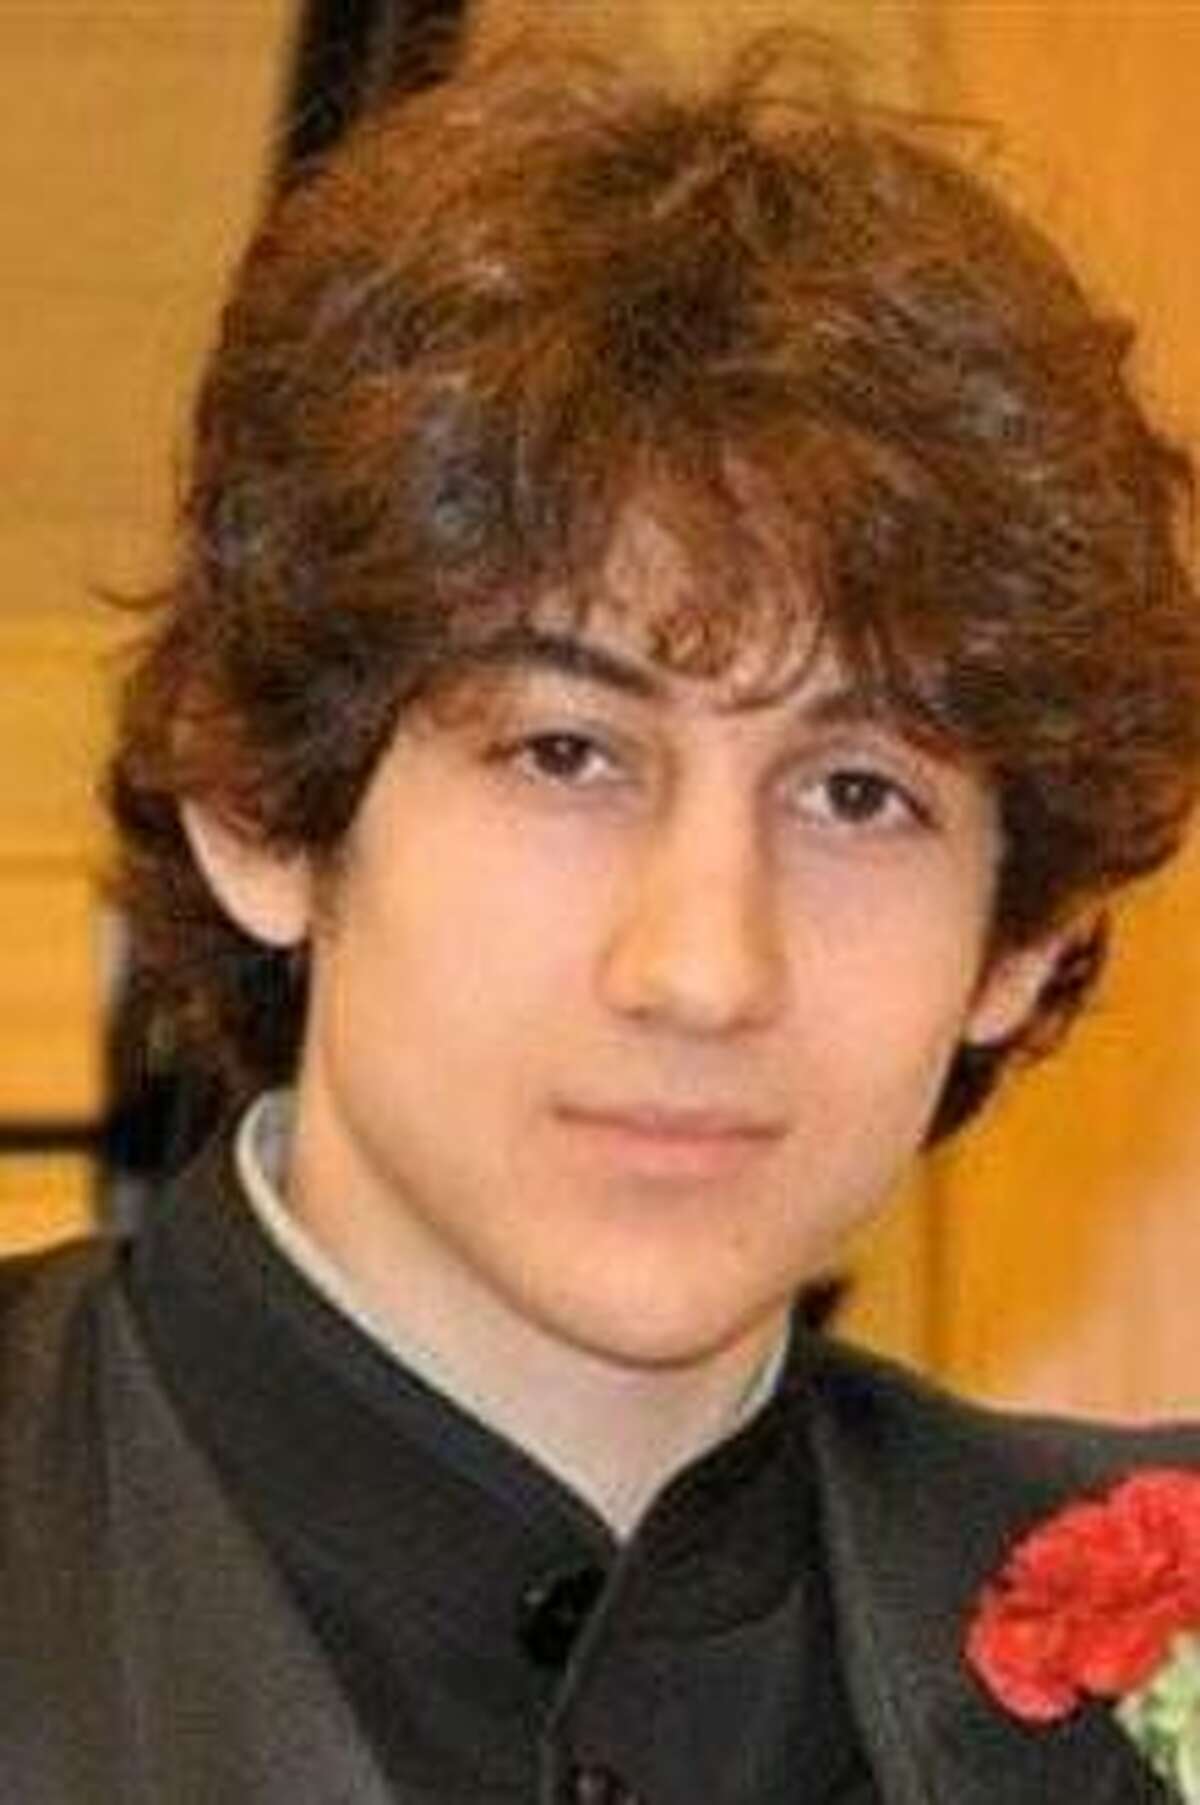 In this undated photo provided by Robin Young, Dzhokhar A. Tsarnaev poses for a photo after graduating from Cambridge Rindge and Latin High School. Tsarnaev has been identified as the surviving suspect in the marathon bombings. Two suspects in the Boston Marathon bombing killed an MIT police officer, injured a transit officer in a firefight and threw explosive devices at police during a getaway attempt in a long night of violence that left one of them dead and another still at large Friday, April 19, 2013. (AP Photo/Robin Young)